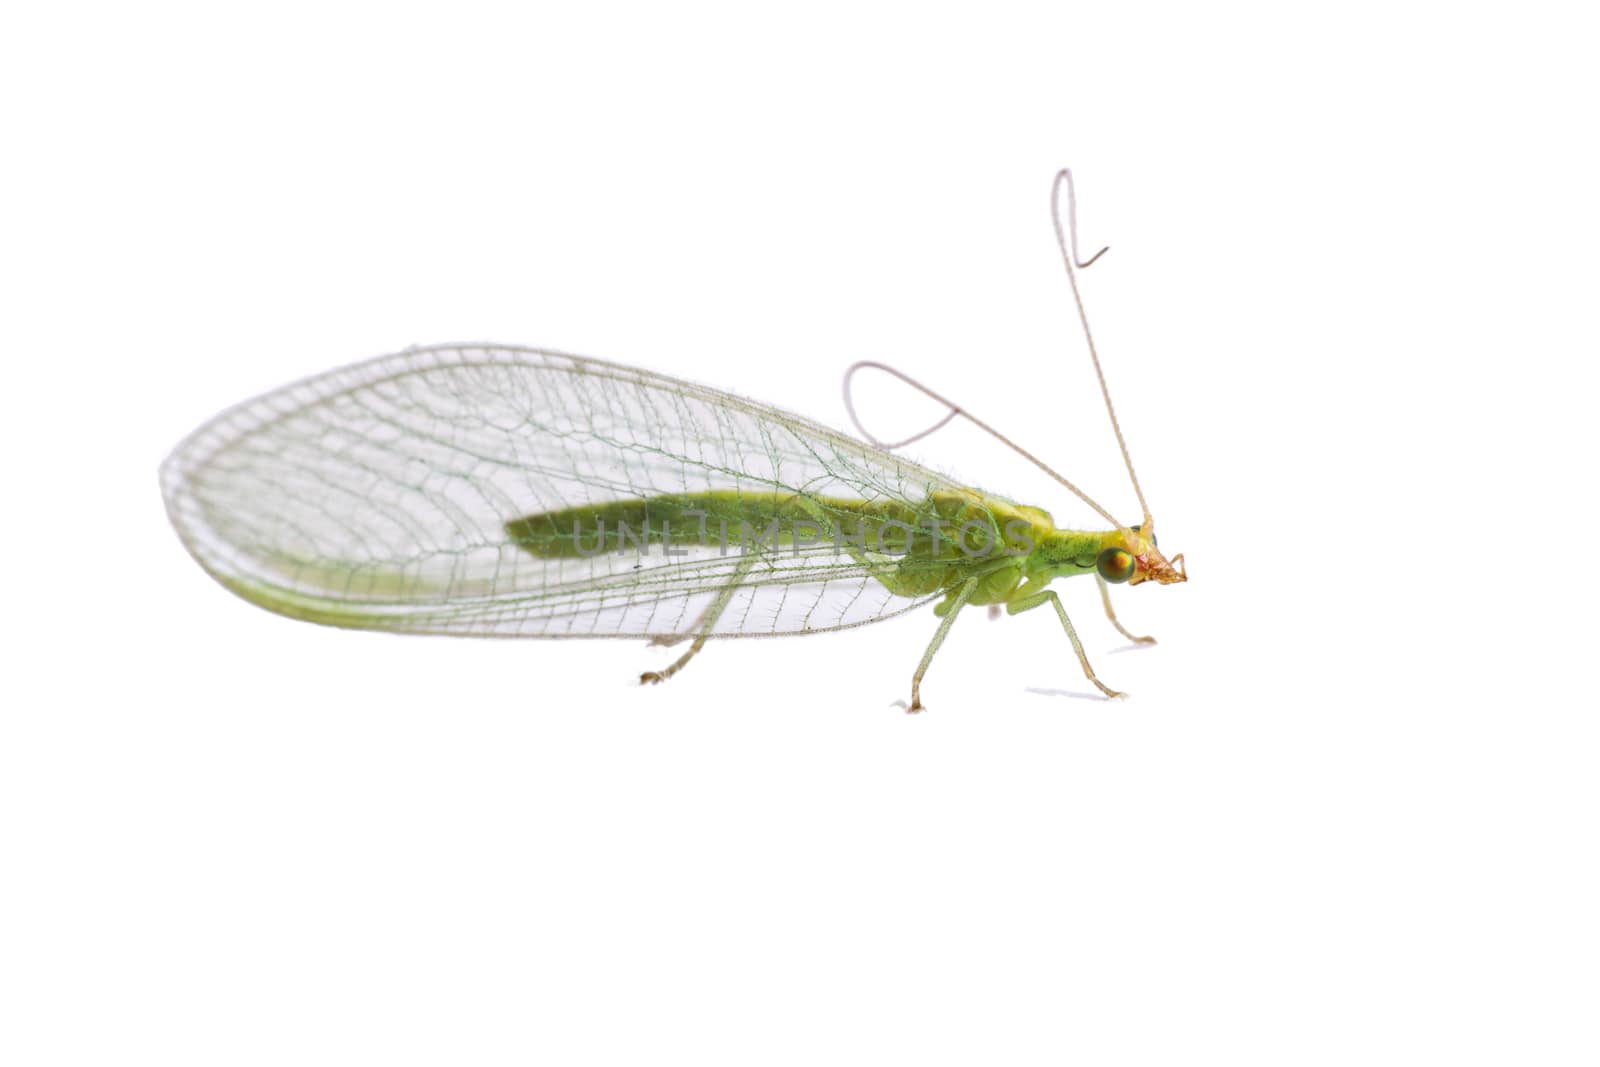 Lacewing fly by Kidza